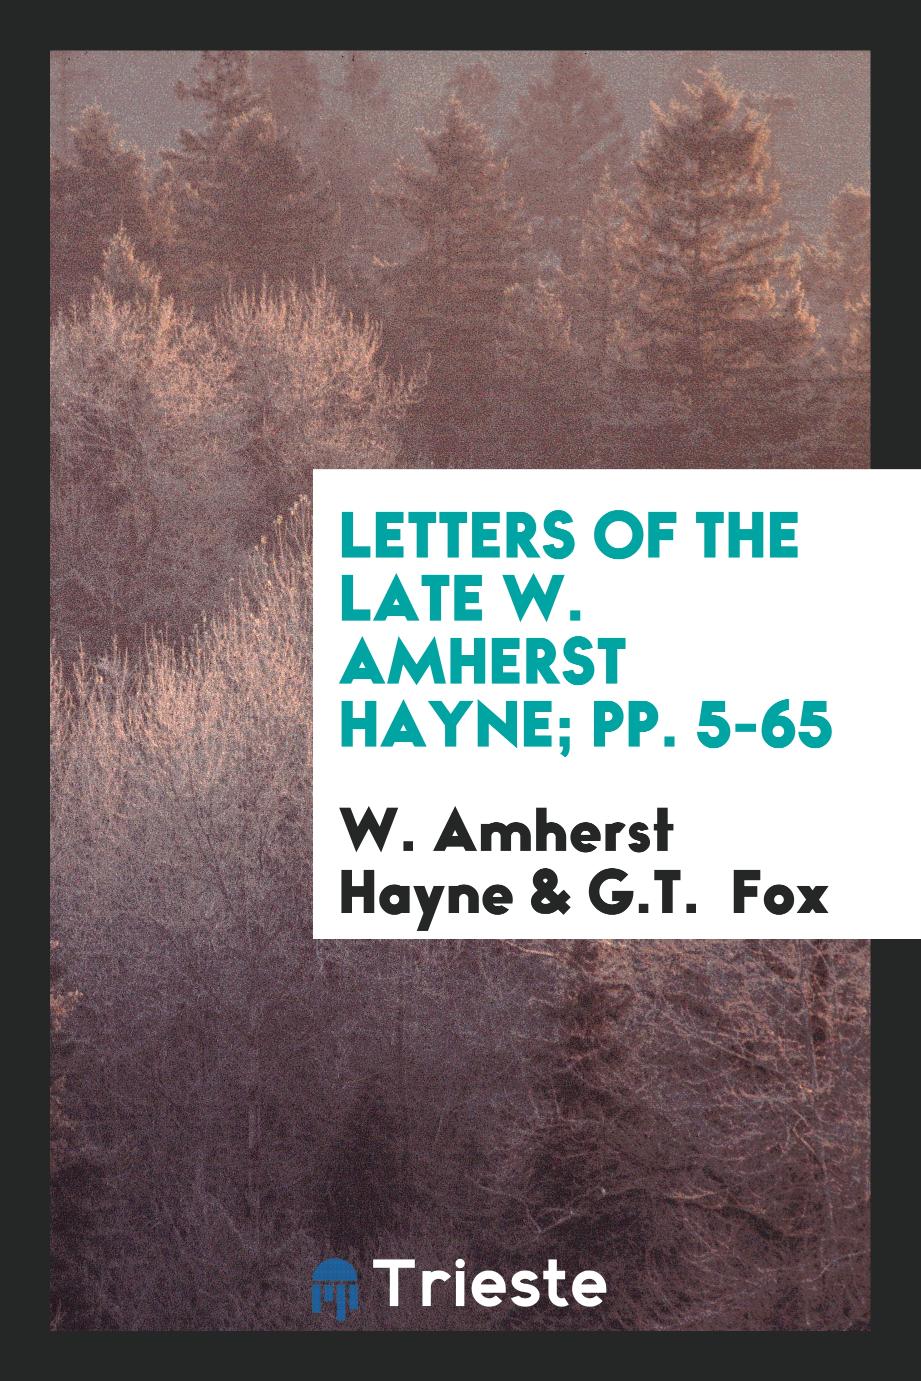 Letters of the late W. Amherst Hayne; pp. 5-65